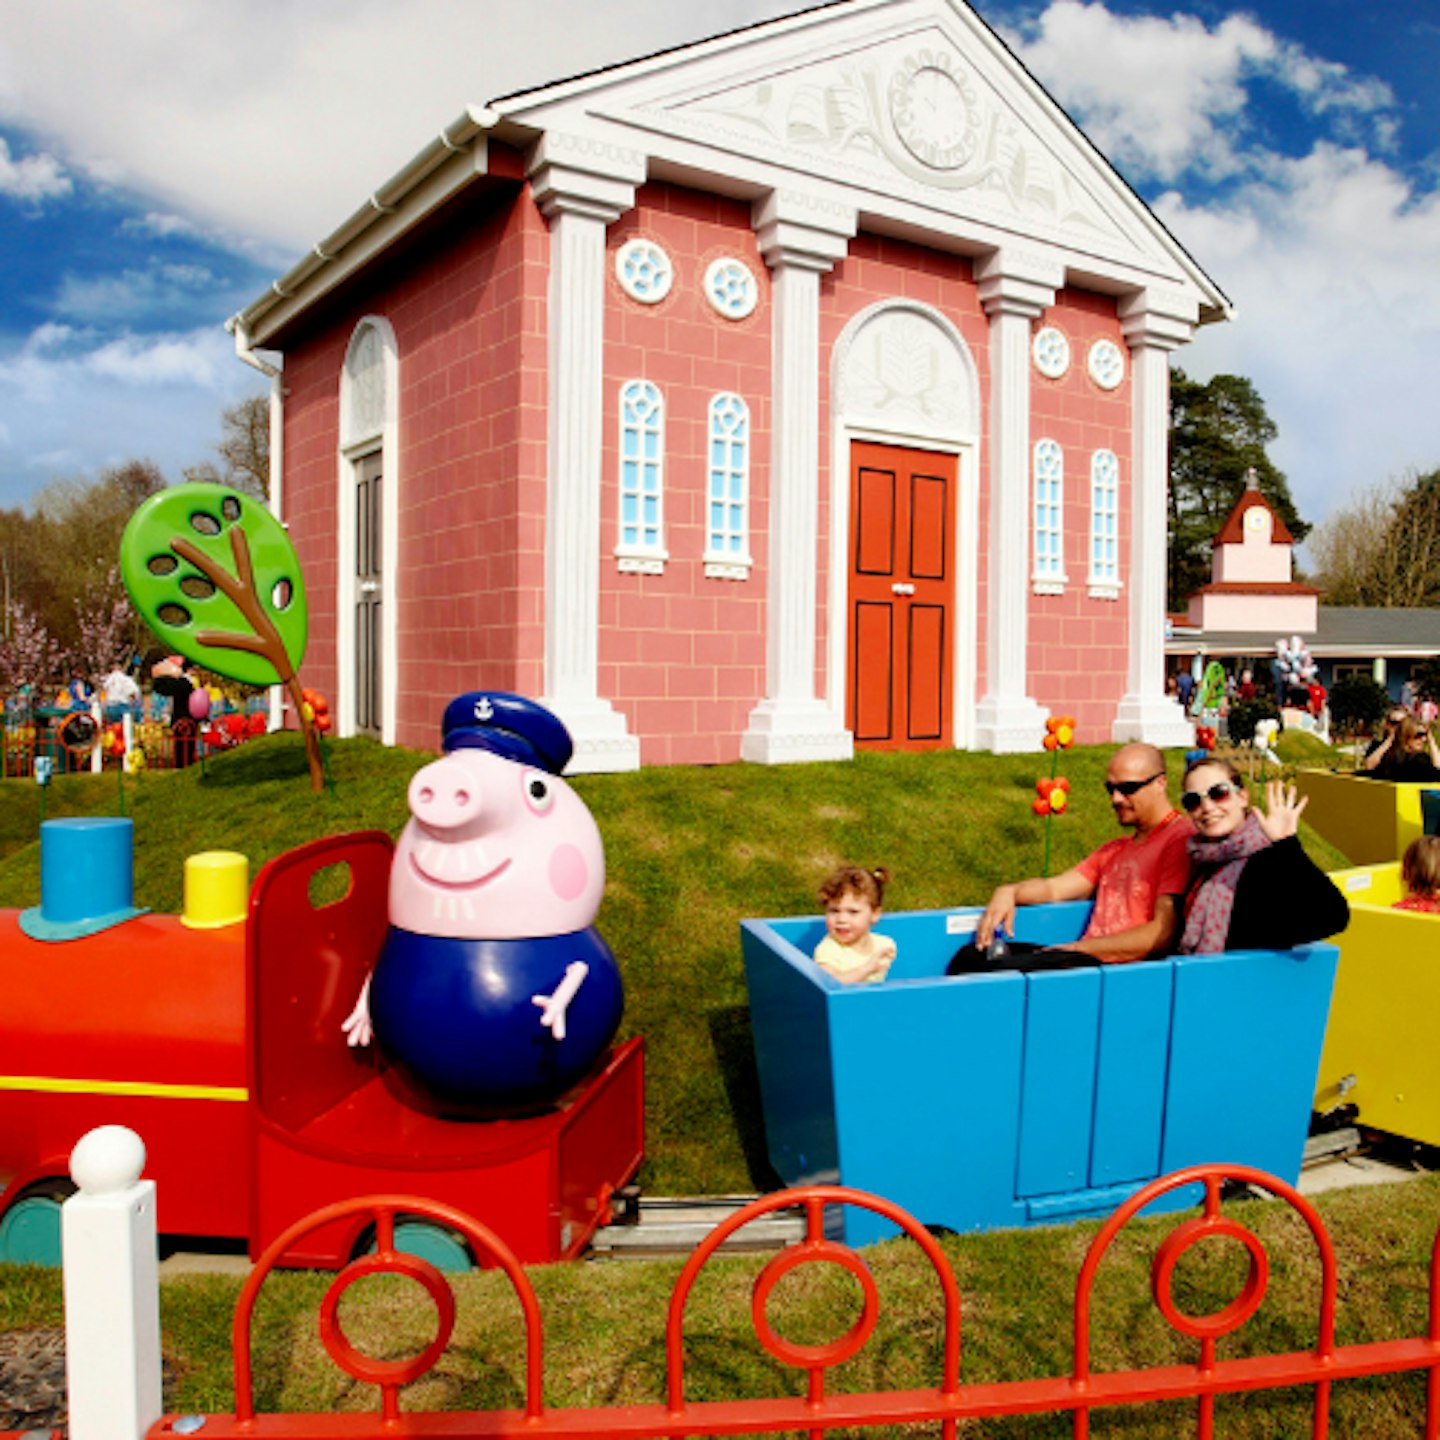 Get your 2nd Park Day free with an Official Paultons Mini Short Break